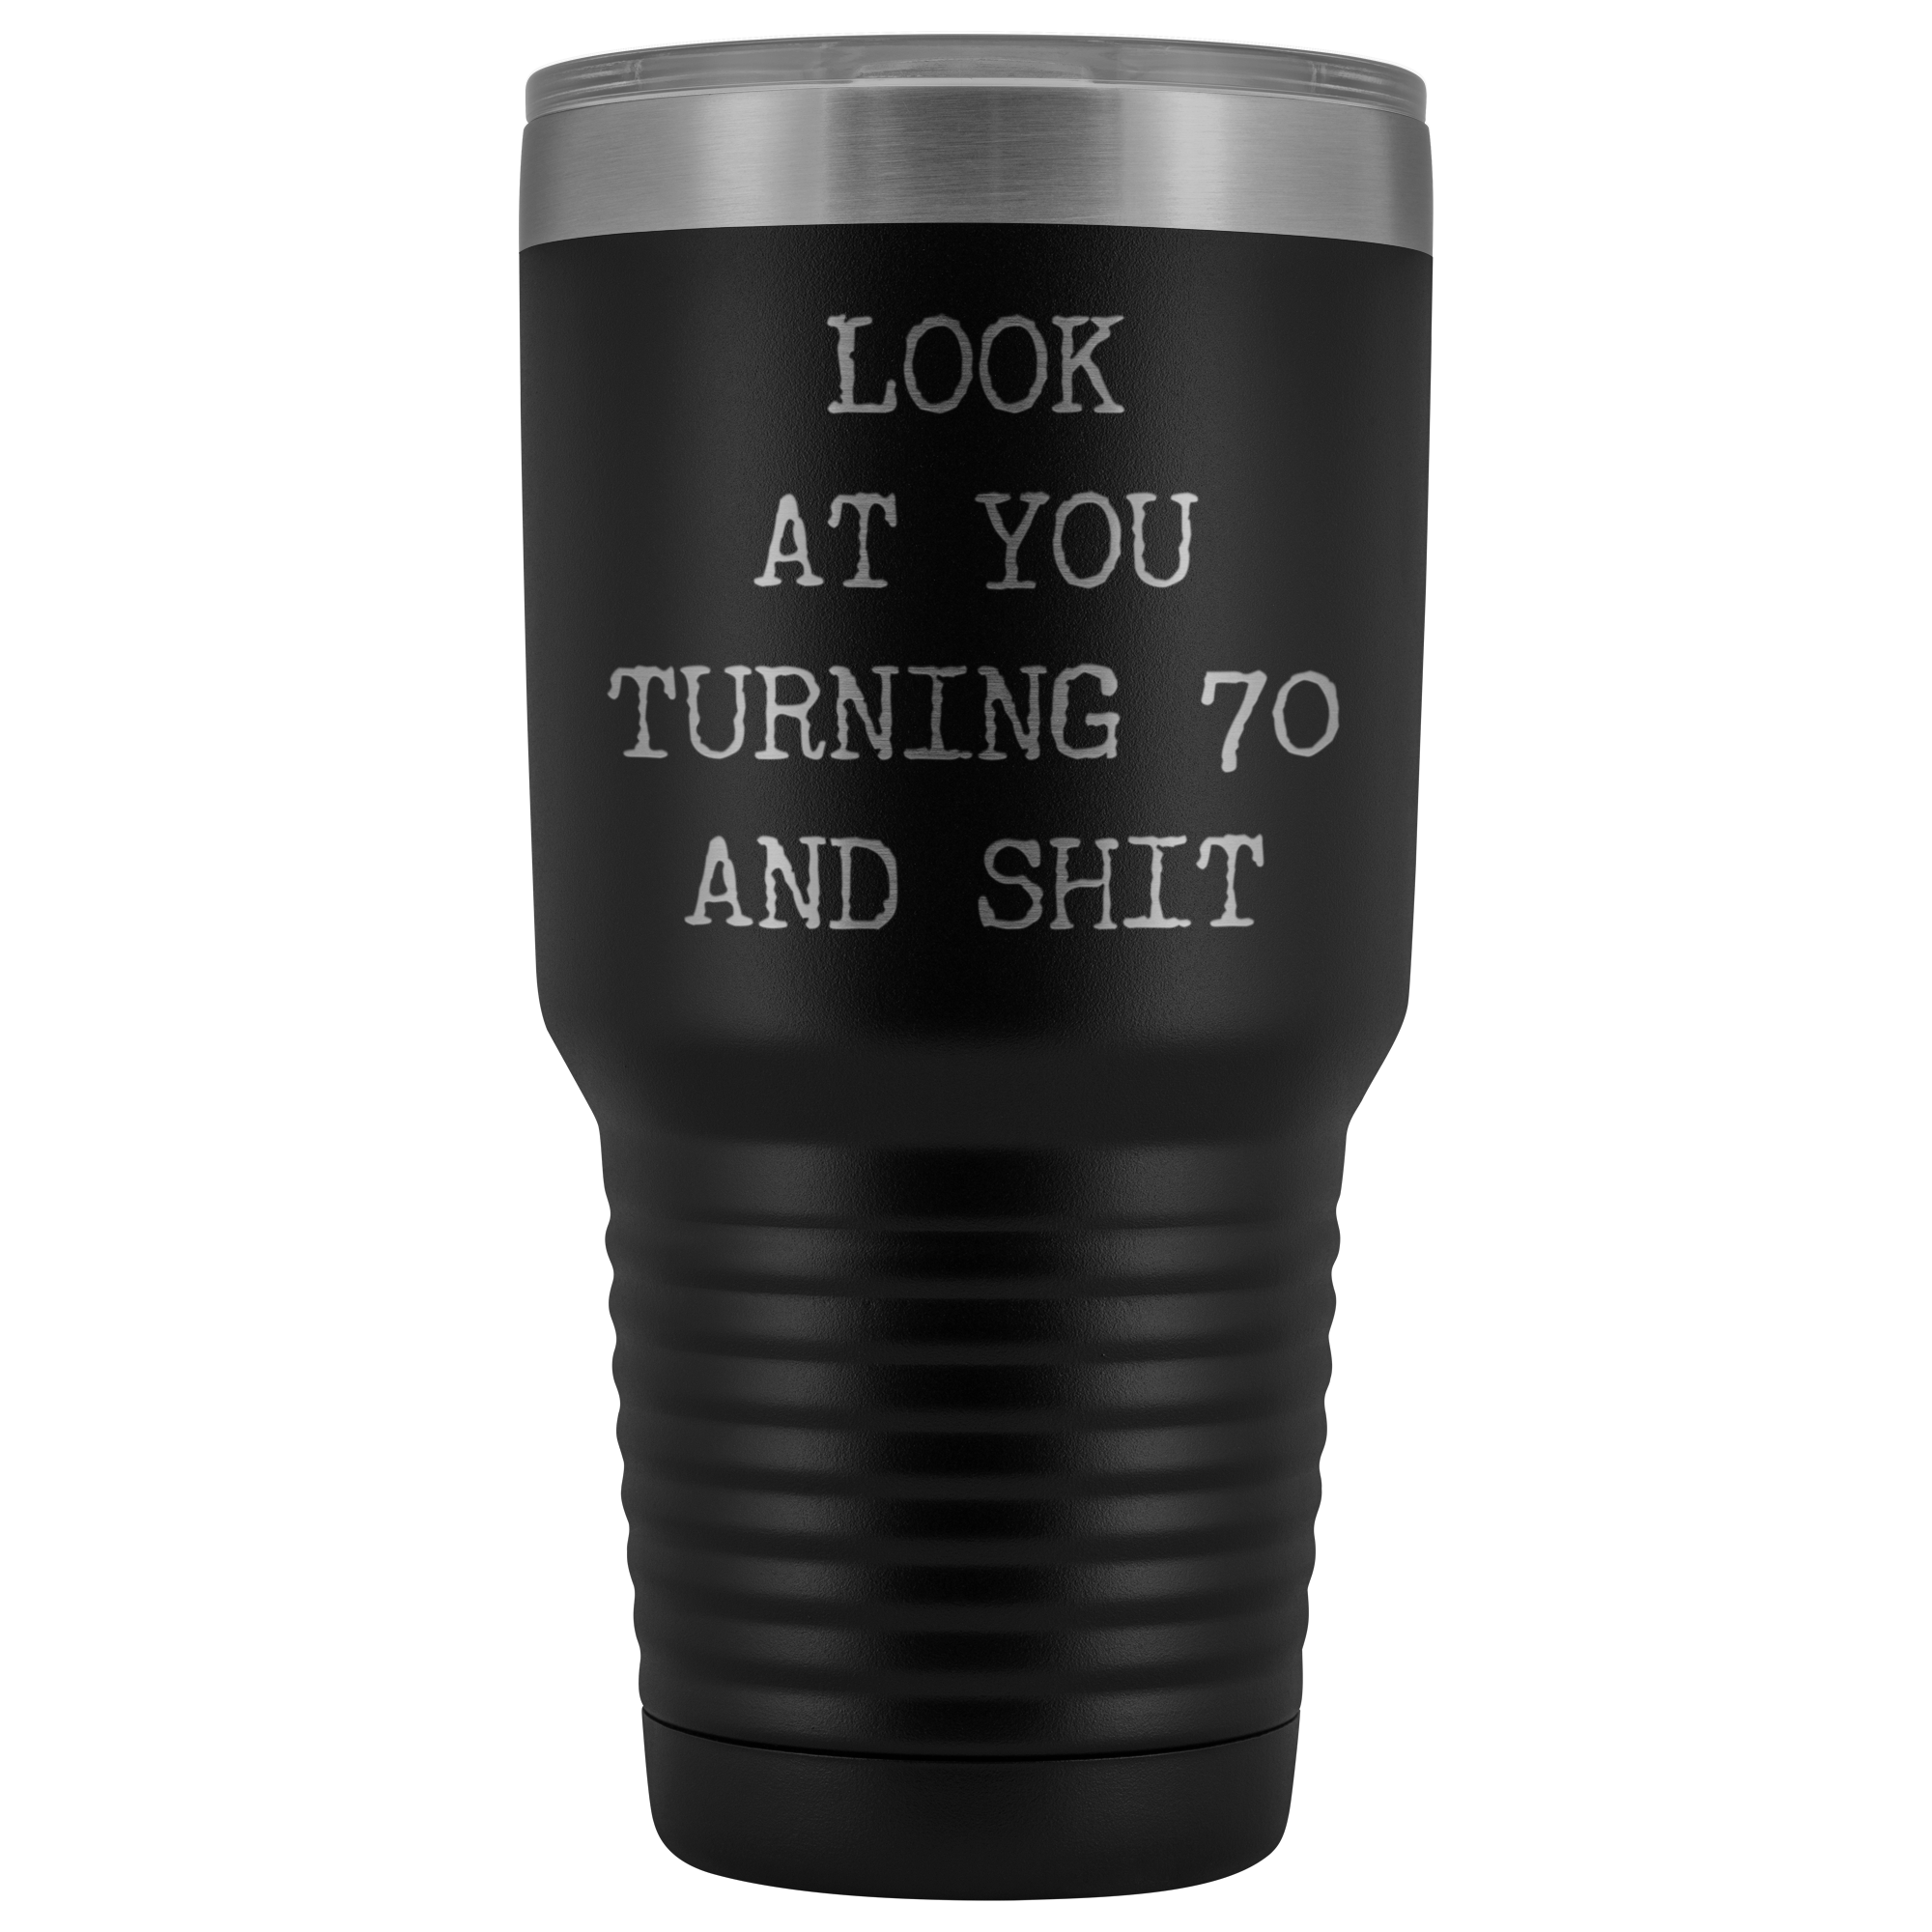 Happy 70th Birthday Look at You Turning 70 Tumbler Metal Mug Insulated Hot Cold Travel Coffee Cup 30oz BPA Free